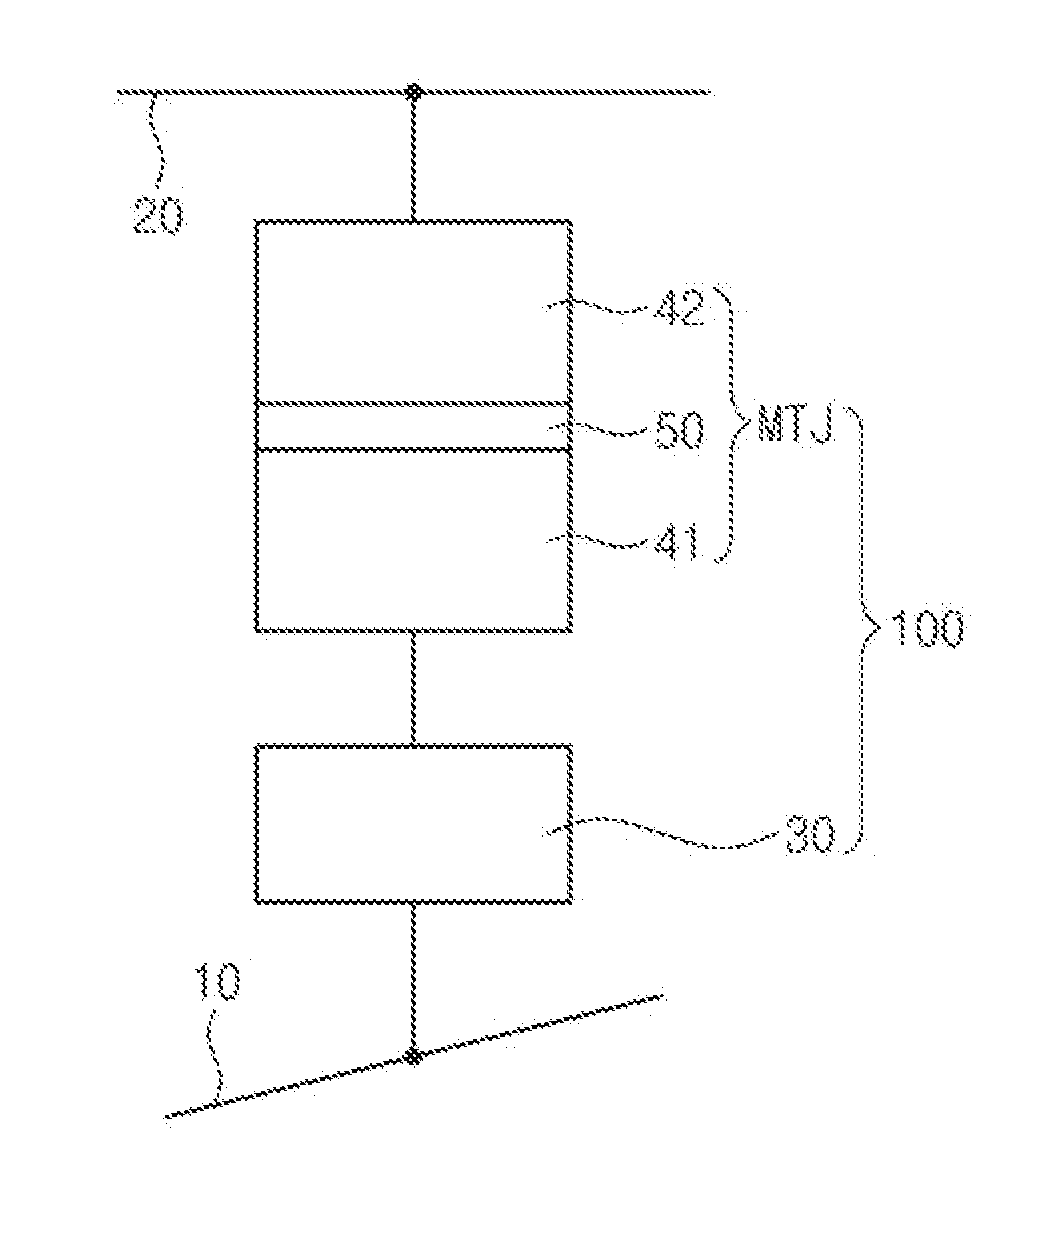 Magnetic tunneling junction devices, memories, memory systems, and electronic devices